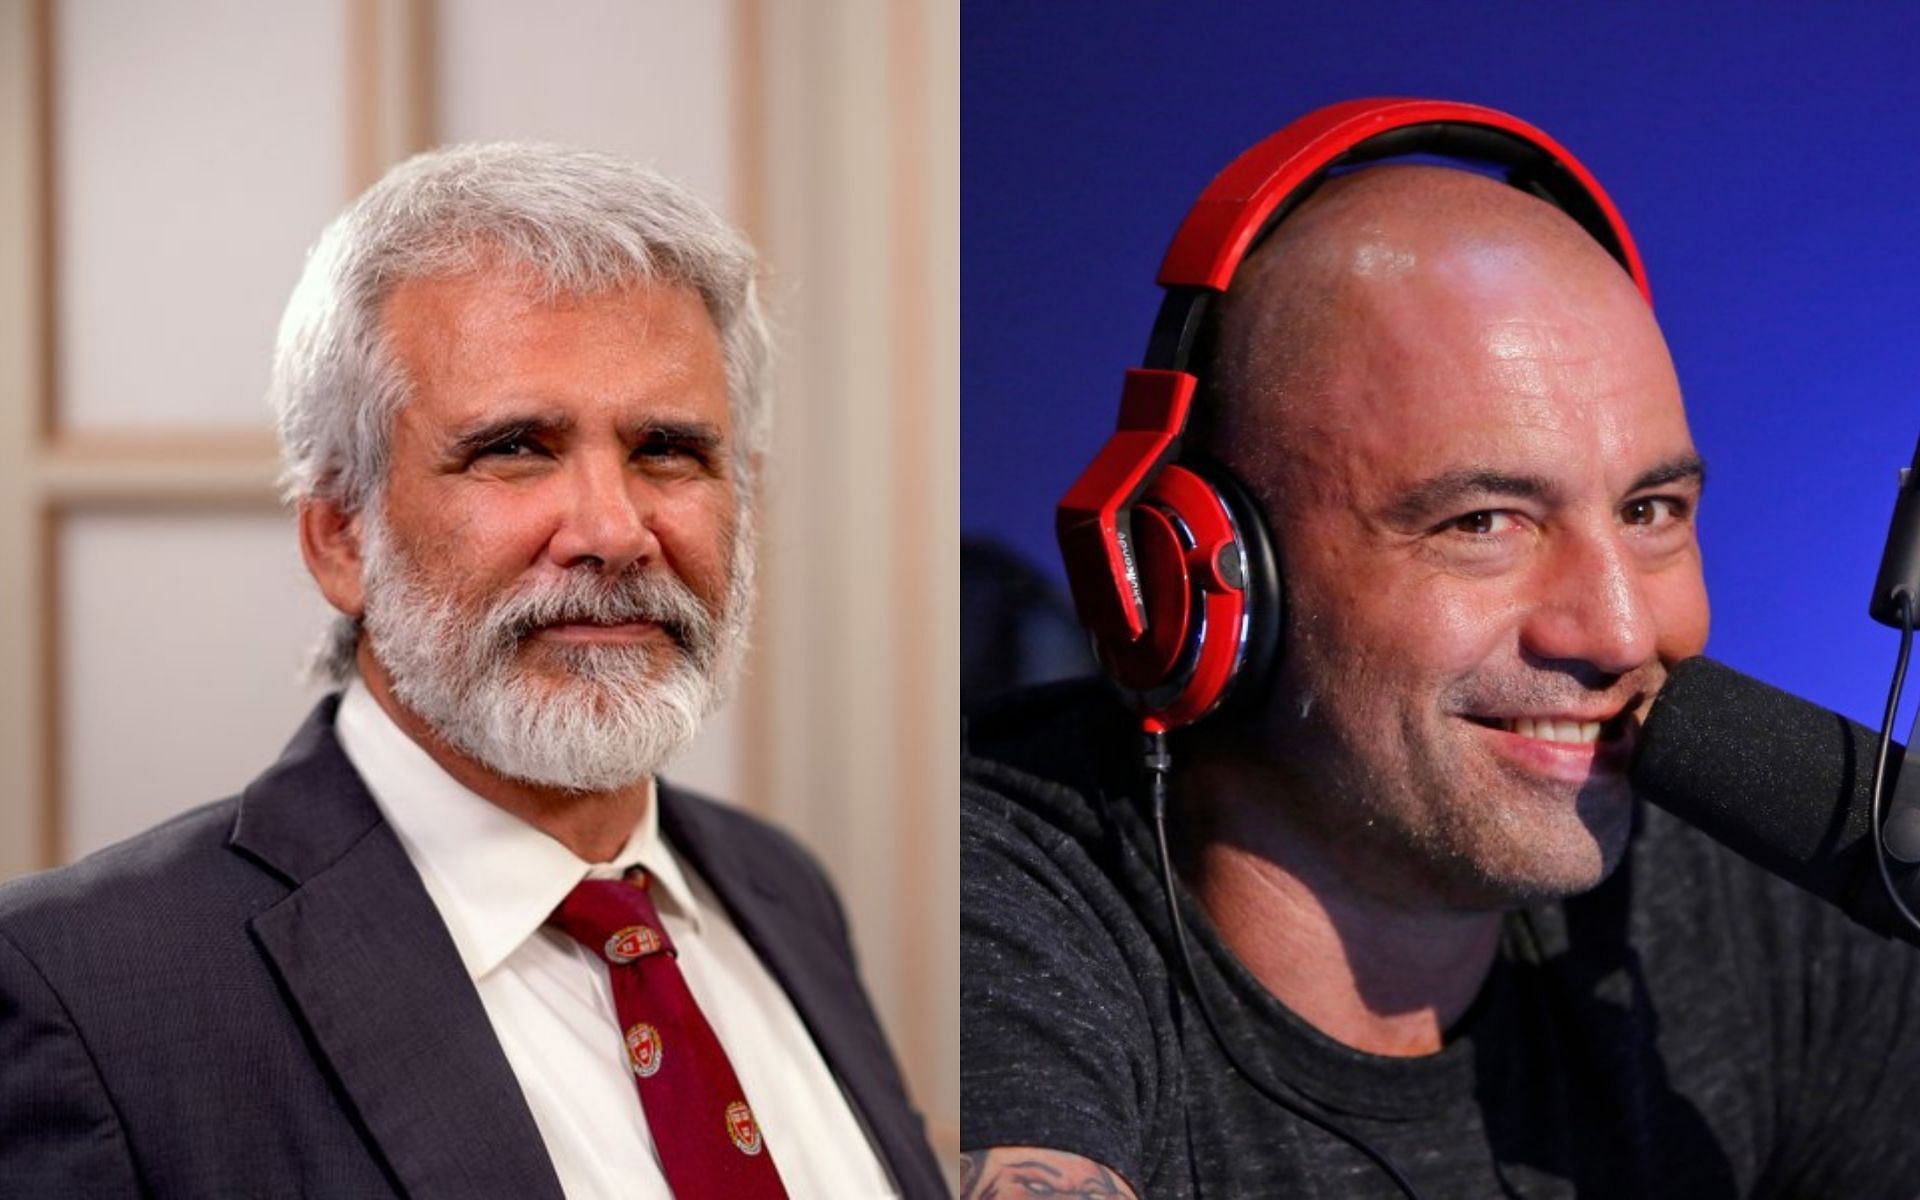 Dr. Robert Malone (left) and Joe Rogan (right) [Image Courtesy: @mercedesschlapp and @nypost on Twitter]